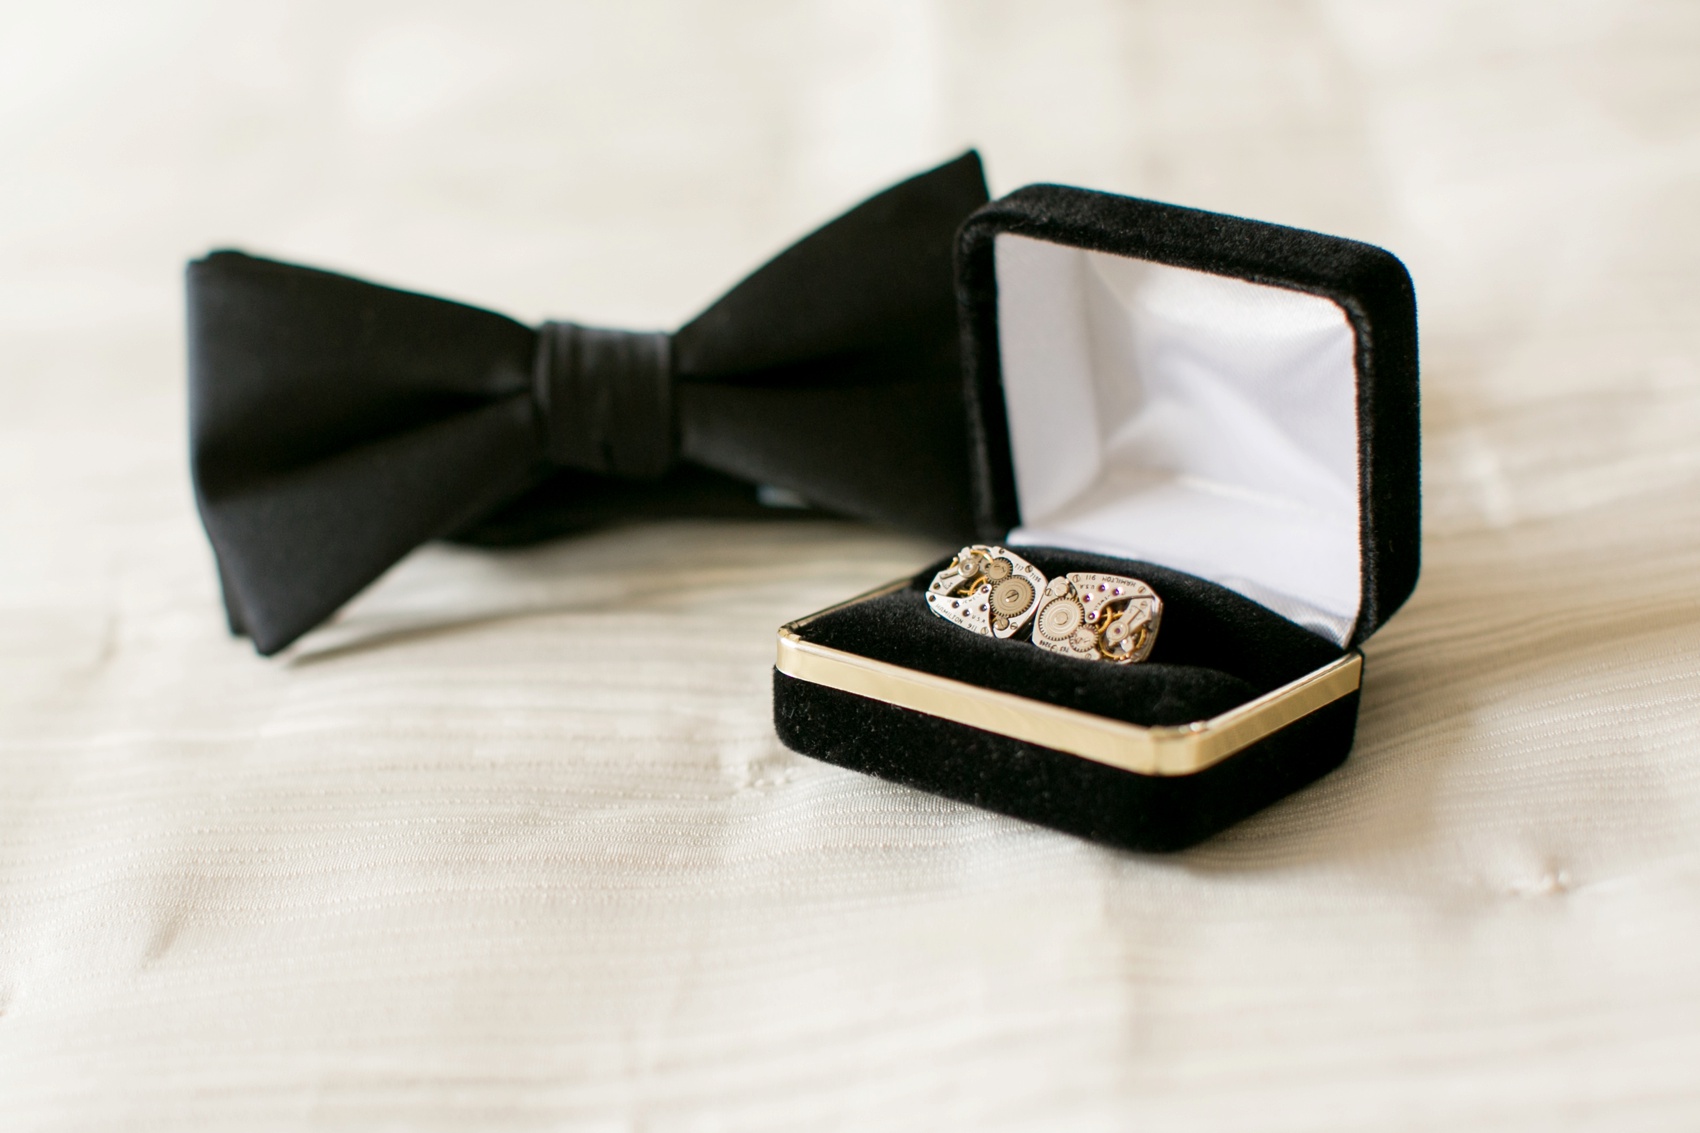 Watch gear cufflinks for a NY wedding, photos by Mikkel Paige Photography, NYC wedding photographer. Planning by Dulce Dreams Events, flowers by Sachi Rose.